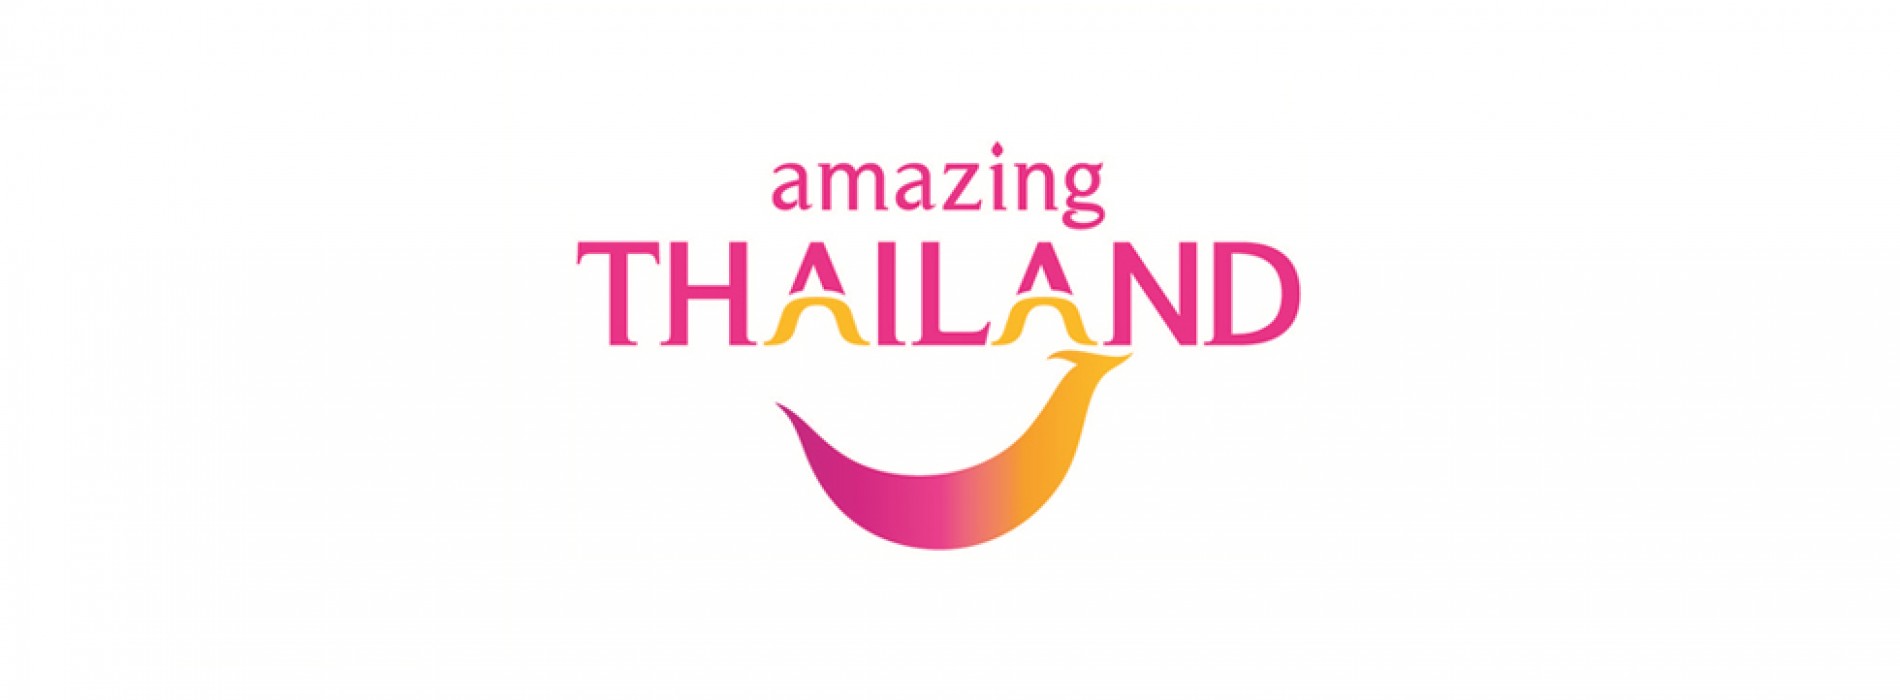 India ranks in top 5 list of highest number of visitors to Thailand